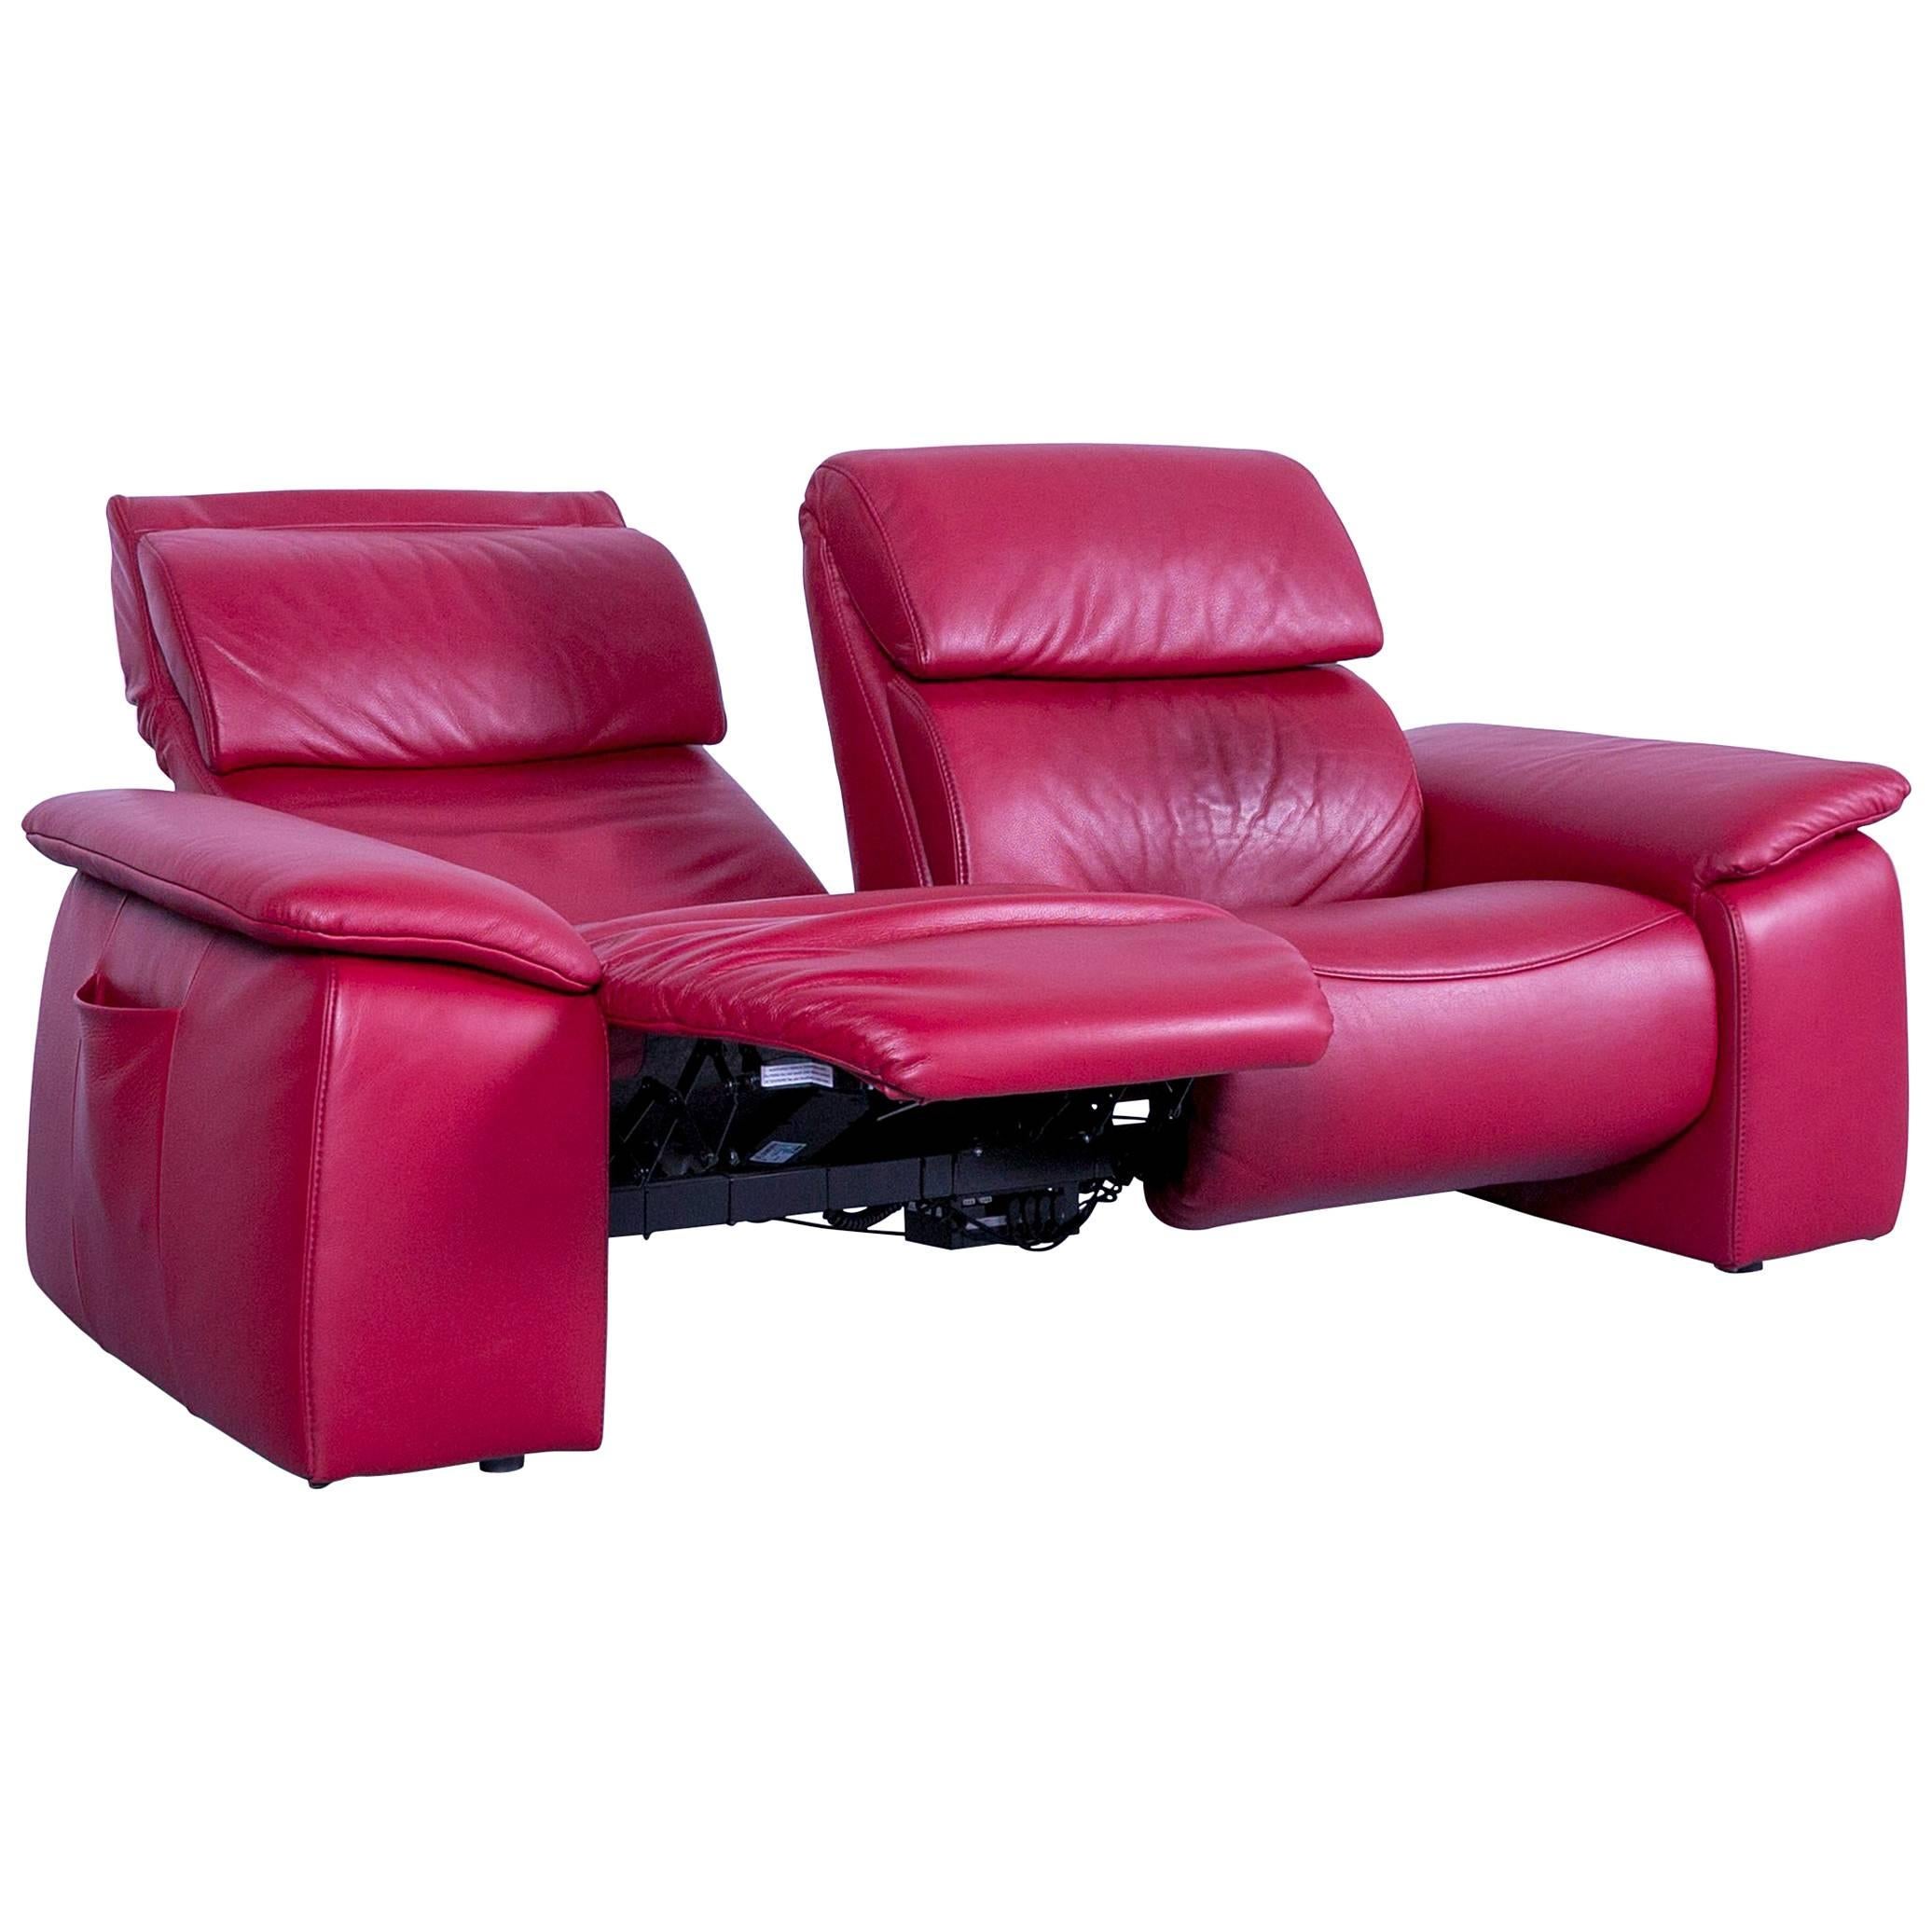 Himolla Designer Sofa Red Two-Seat Couch Germany Electric Recliner